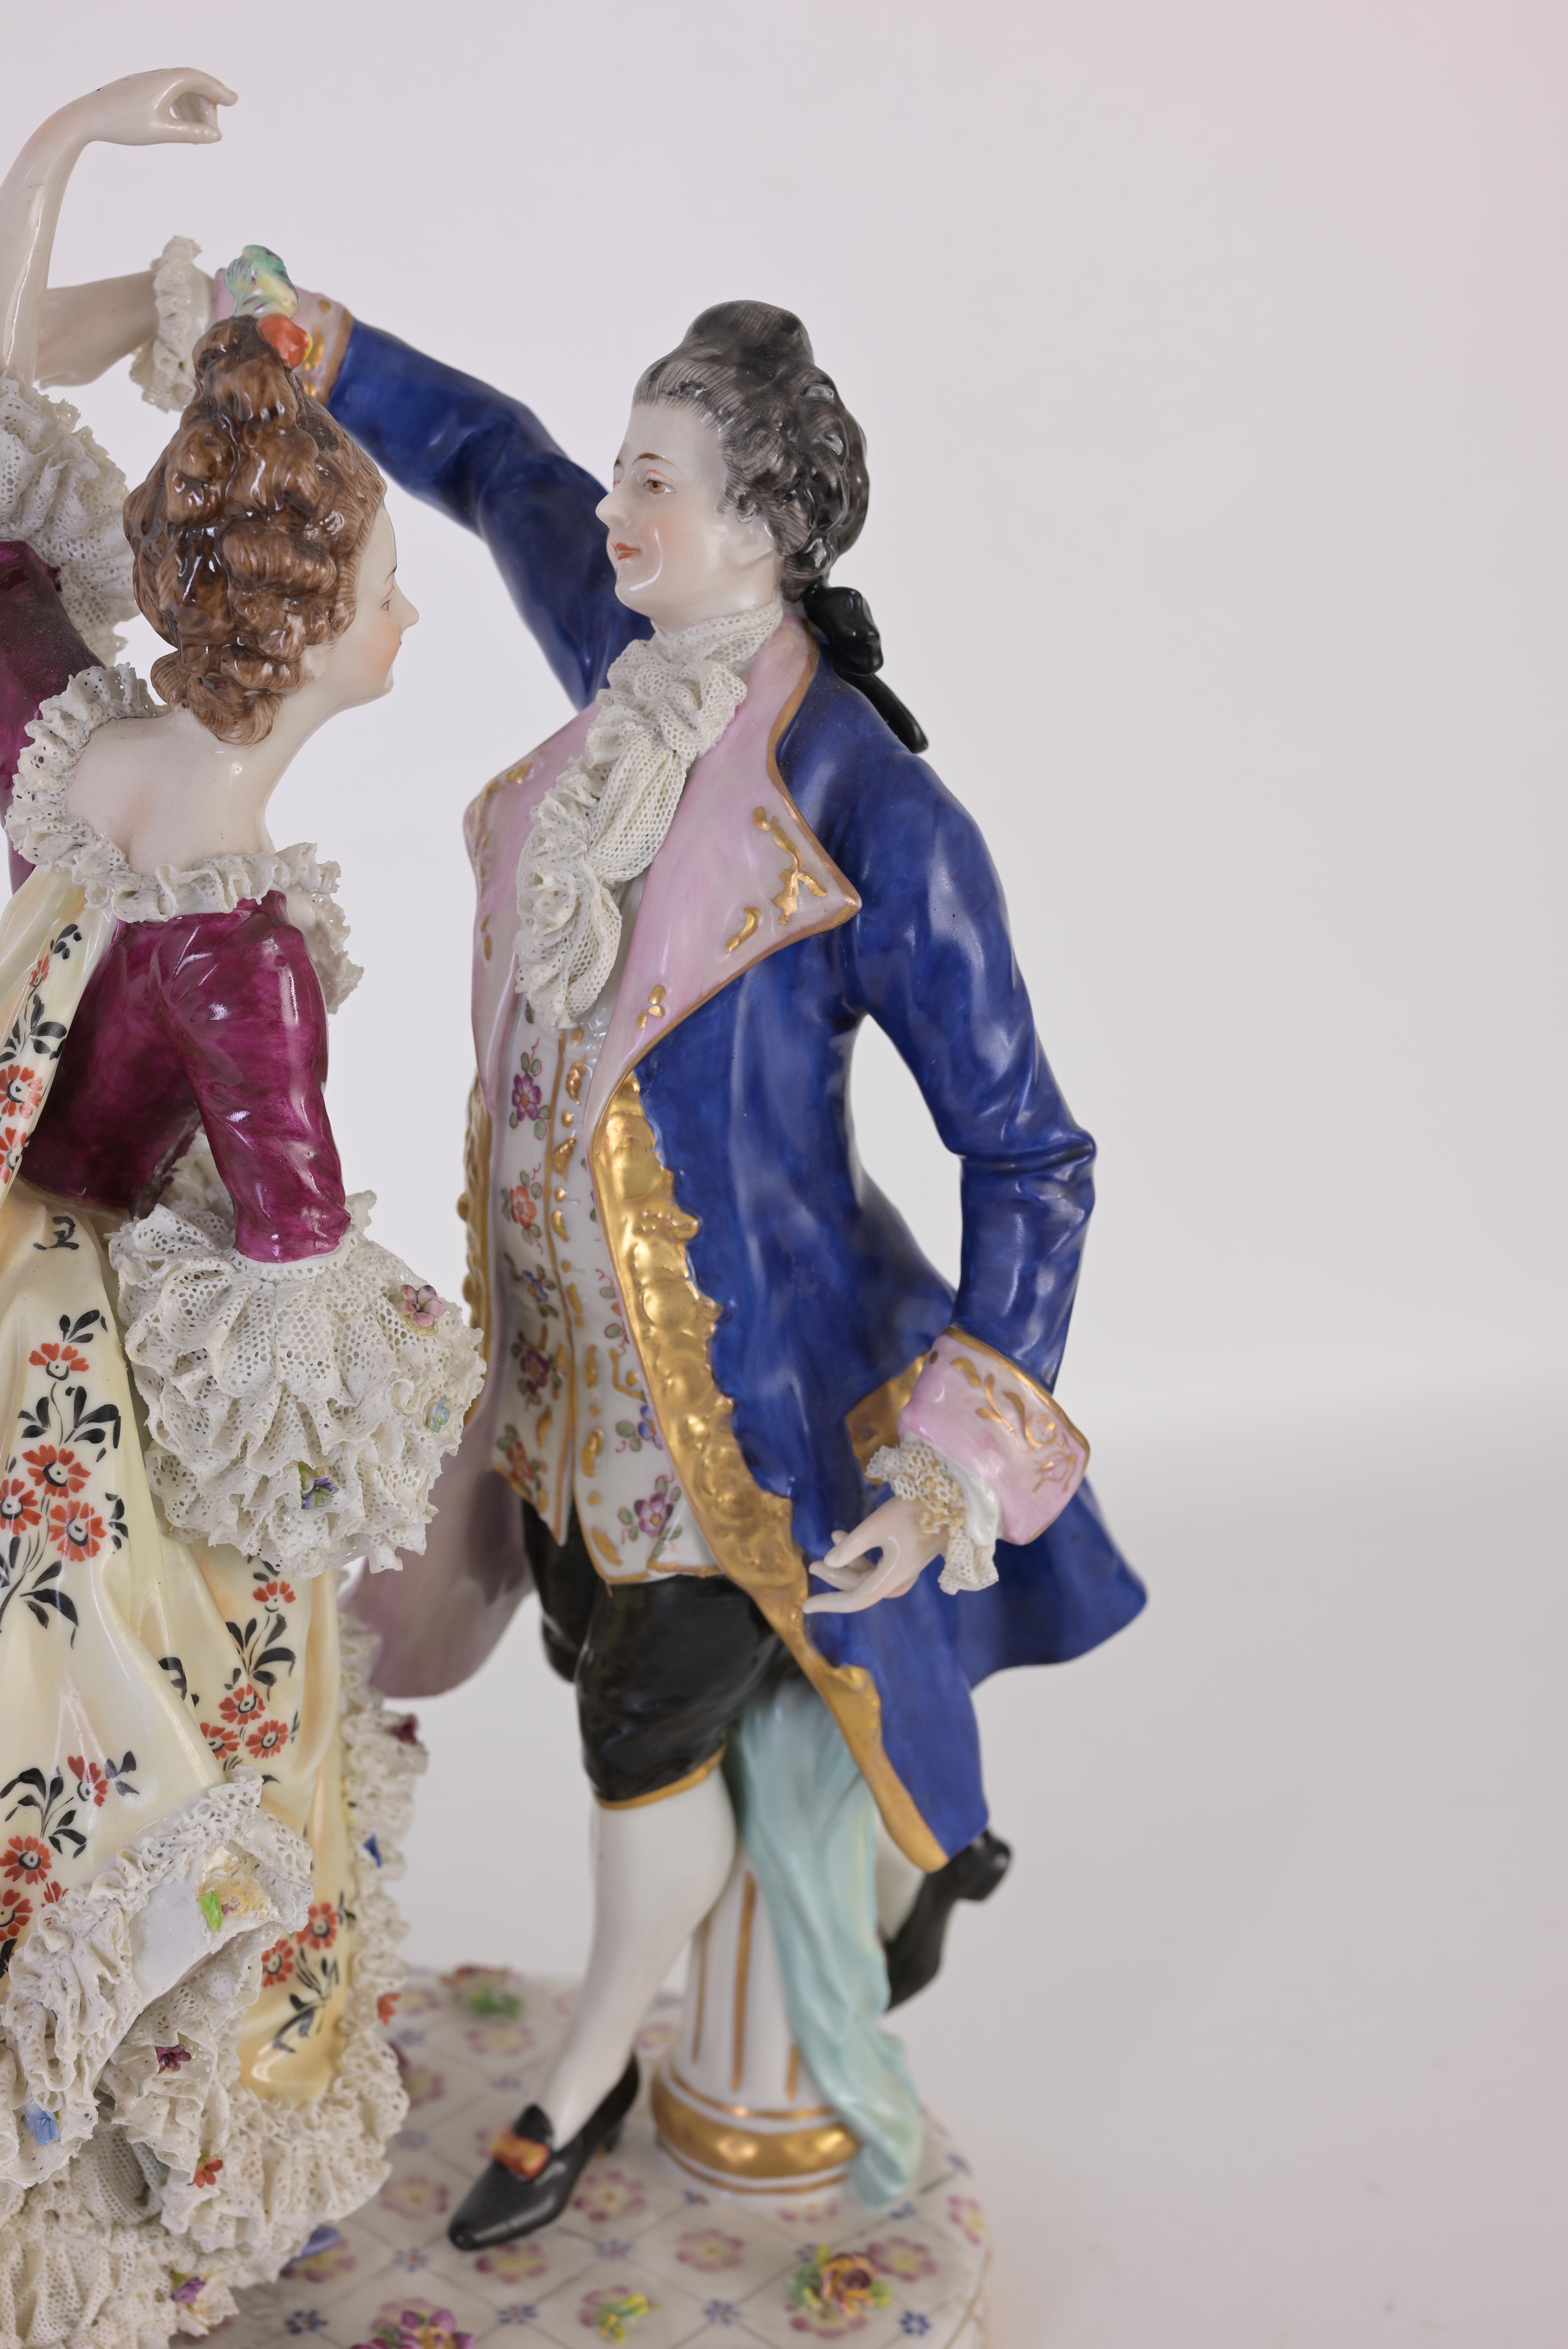 Dresden Style Porcelain Figurine - Image 5 of 8